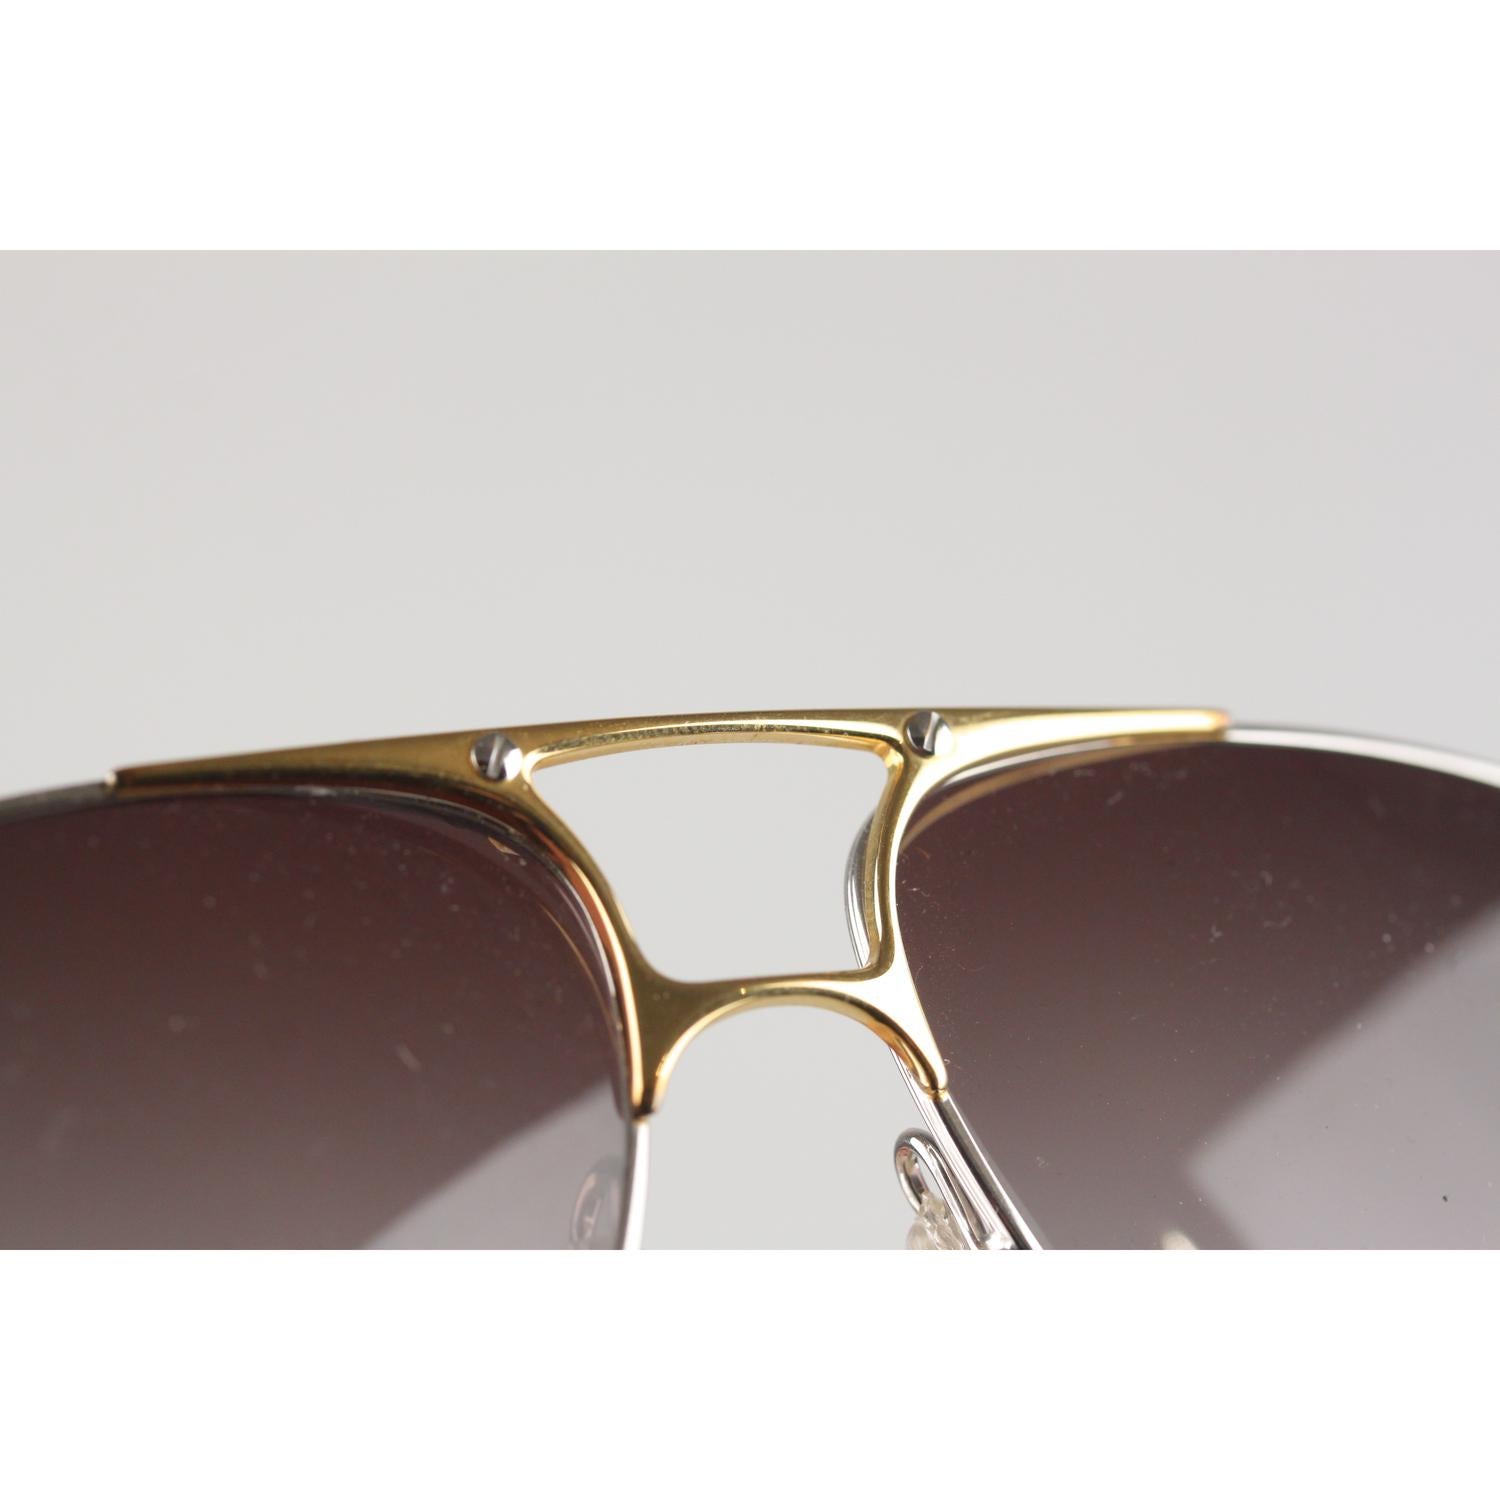 Women's or Men's Zeiss Vintage Aviator Silver Sunglasses 5893 4000 62mm New Old Stock